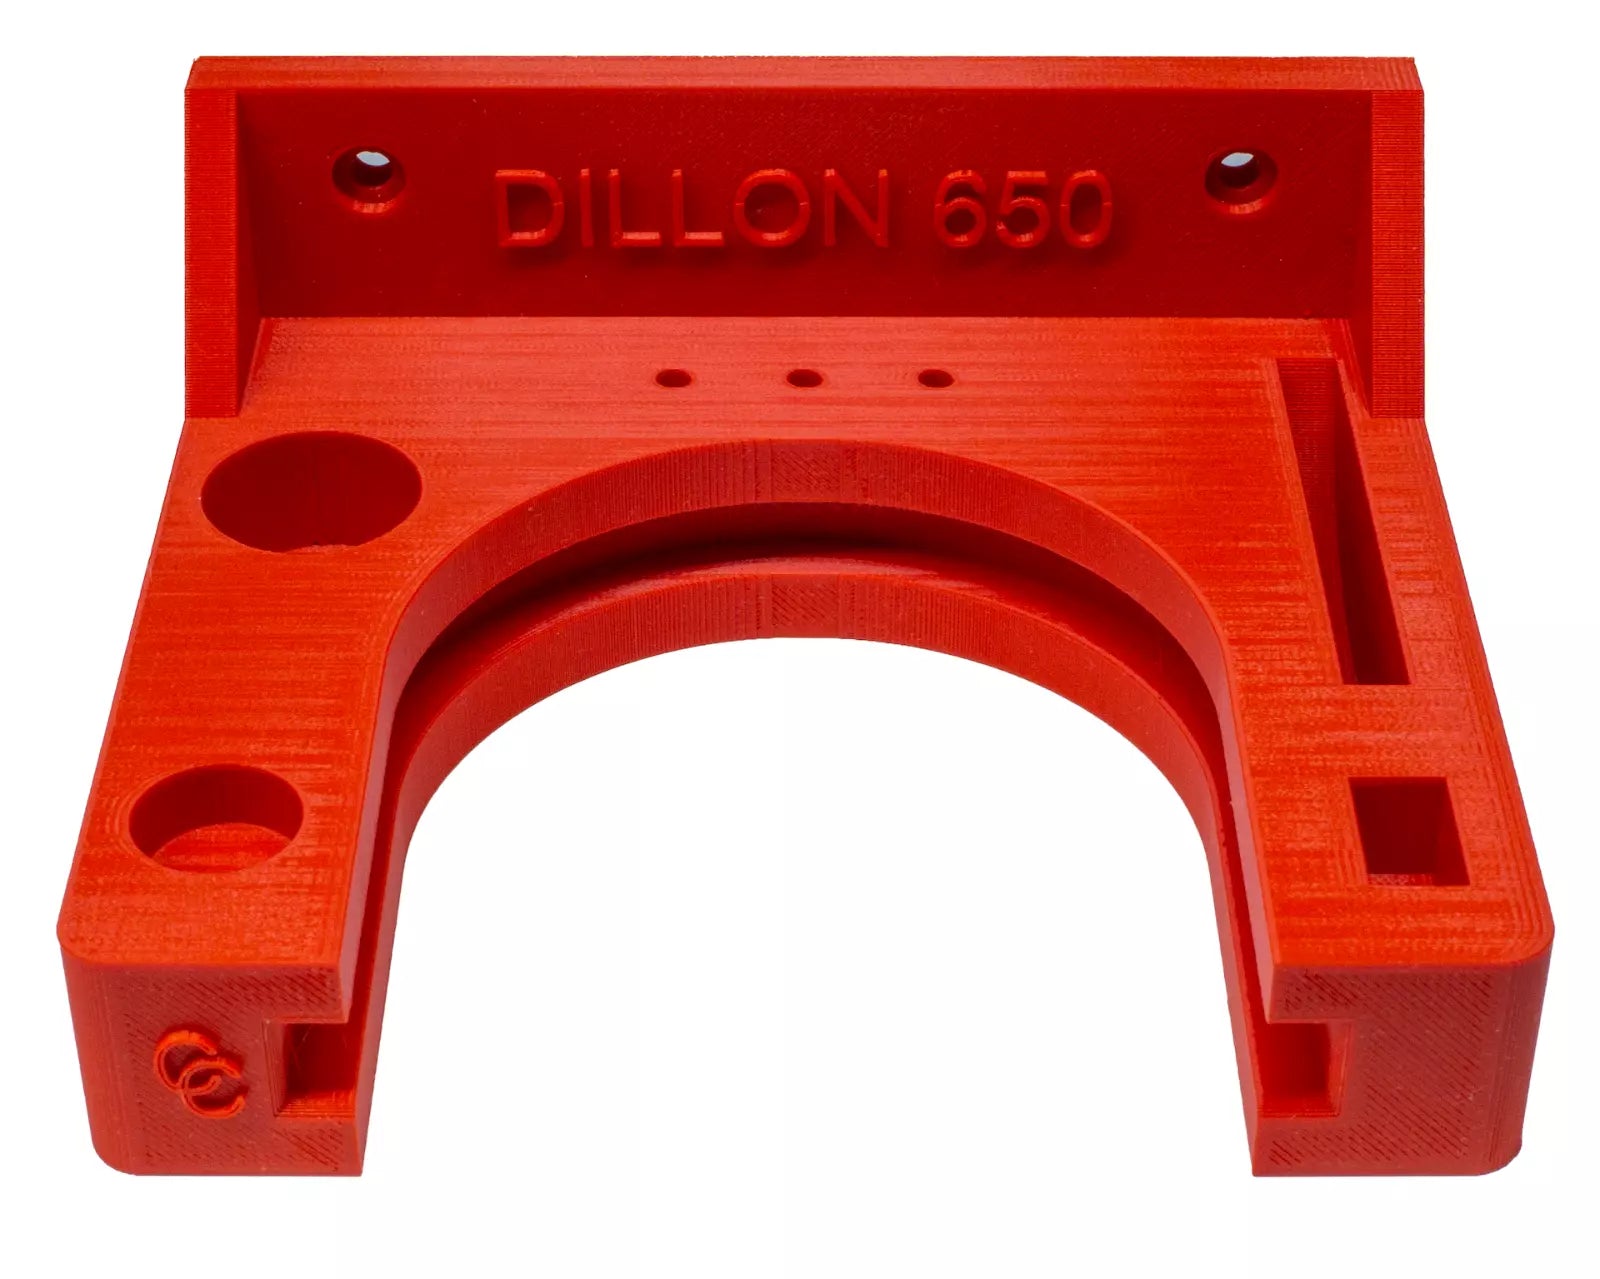 Dillon XL650-750 Style tool head Billet Aluminum CNC Made and holder (Bundle)